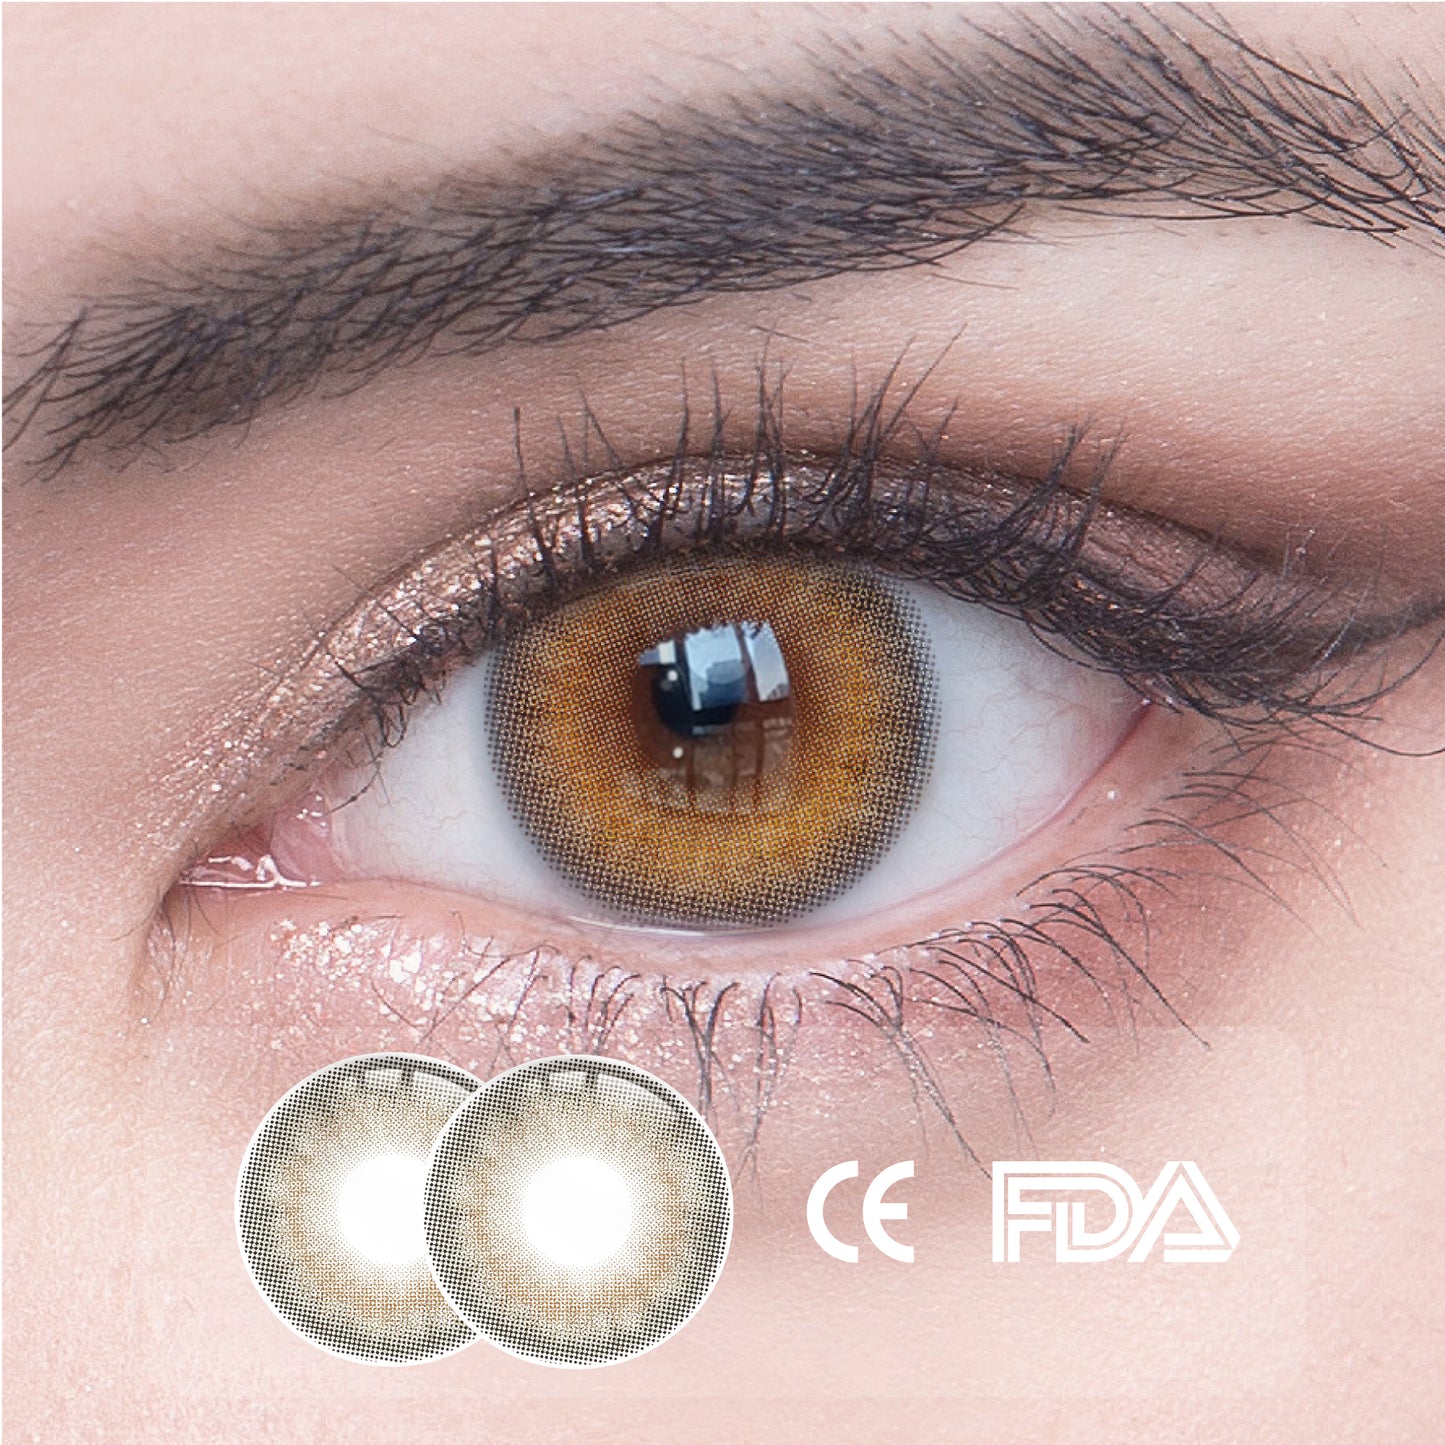 1pcs FDA Certificate Eyes Colorful Contact Lenses - Fascinated green